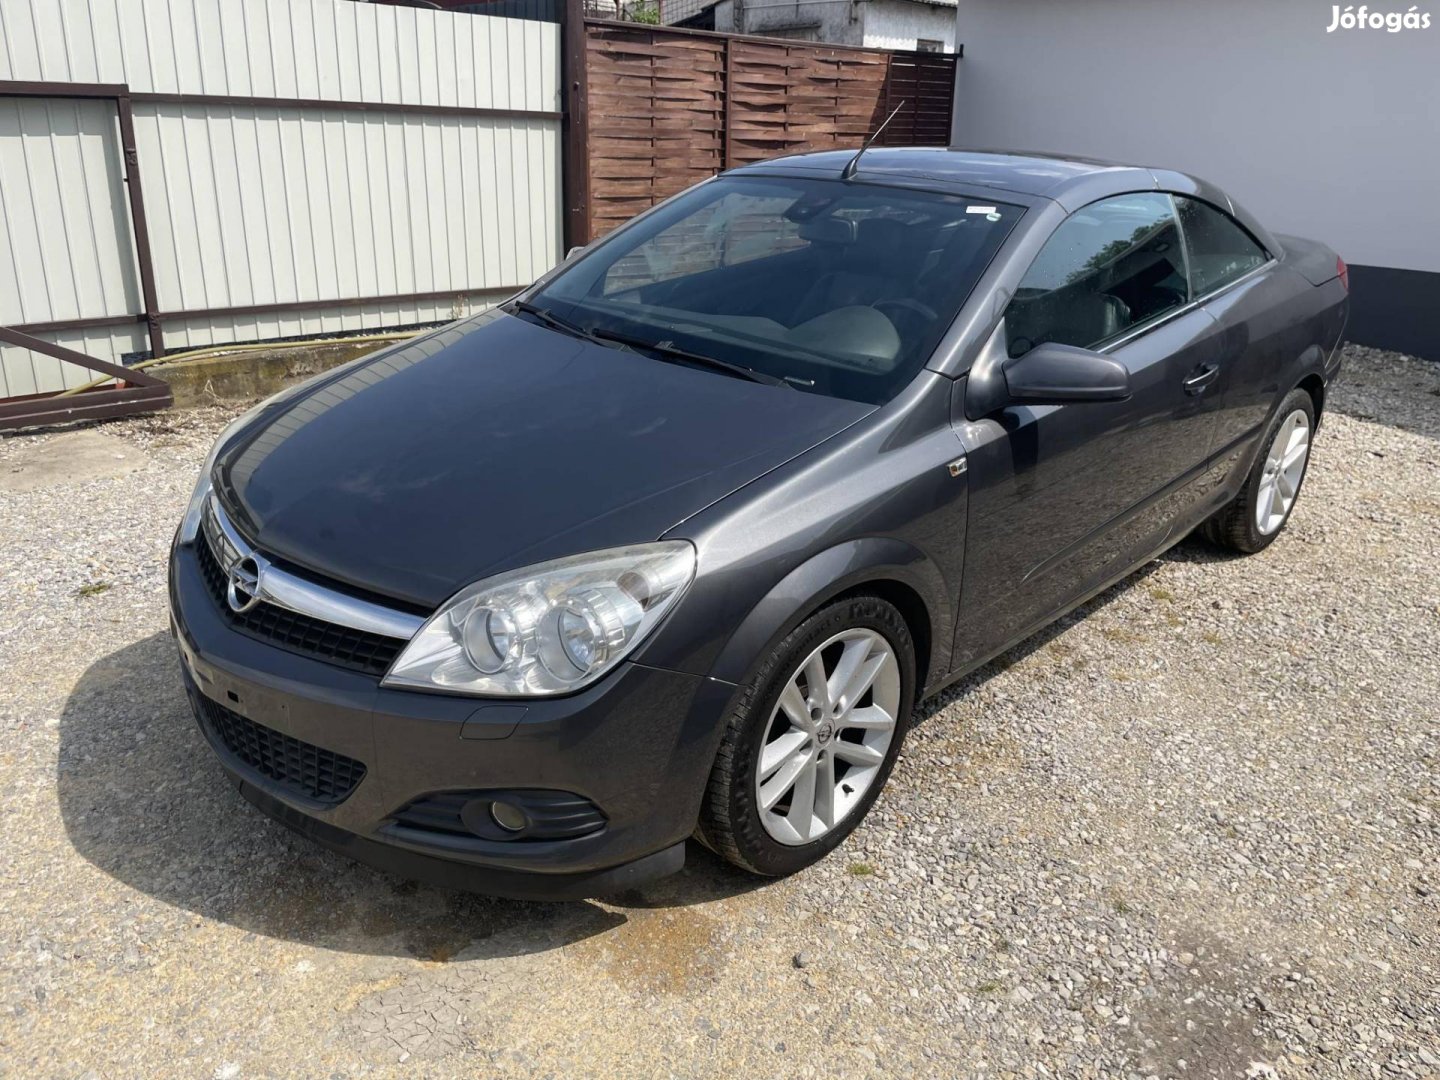 Opel Astra 1.6 GTC 111 Limited Easytronic